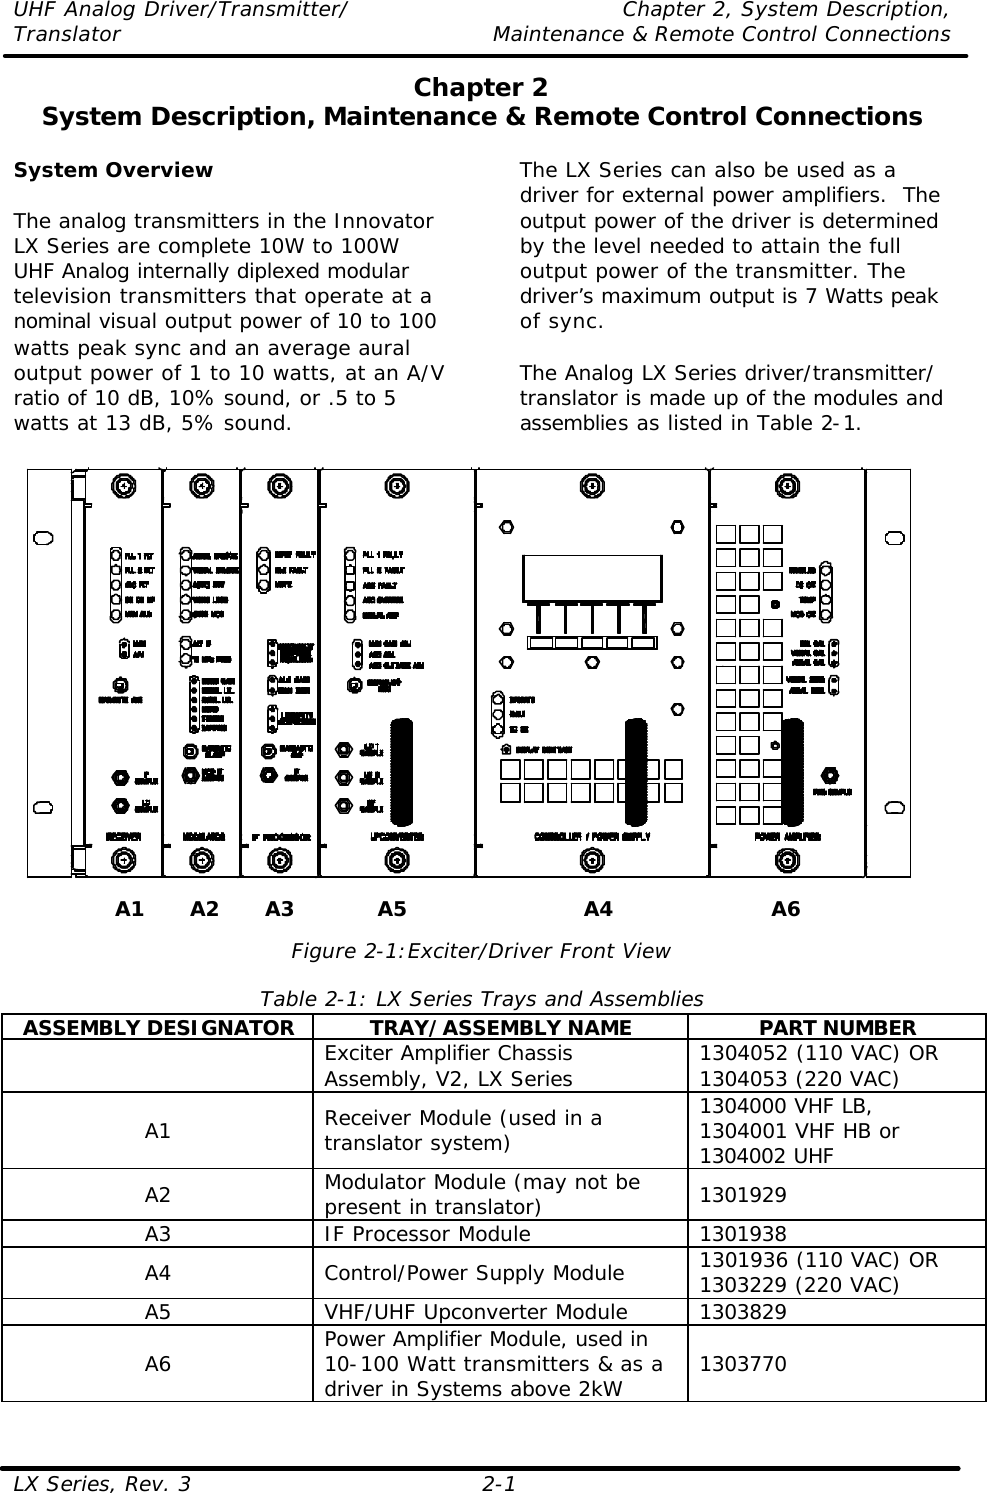 UHF Analog Driver/Transmitter/ Chapter 2, System Description, Translator Maintenance &amp; Remote Control Connections LX Series, Rev. 3 2-1 Chapter 2 System Description, Maintenance &amp; Remote Control Connections  System Overview  The analog transmitters in the Innovator LX Series are complete 10W to 100W UHF Analog internally diplexed modular television transmitters that operate at a nominal visual output power of 10 to 100 watts peak sync and an average aural output power of 1 to 10 watts, at an A/V ratio of 10 dB, 10% sound, or .5 to 5 watts at 13 dB, 5% sound.  The LX Series can also be used as a driver for external power amplifiers.  The output power of the driver is determined by the level needed to attain the full output power of the transmitter. The driver’s maximum output is 7 Watts peak of sync.  The Analog LX Series driver/transmitter/ translator is made up of the modules and assemblies as listed in Table 2-1.     Figure 2-1:Exciter/Driver Front View  Table 2-1: LX Series Trays and Assemblies ASSEMBLY DESIGNATOR TRAY/ASSEMBLY NAME PART NUMBER  Exciter Amplifier Chassis Assembly, V2, LX Series 1304052 (110 VAC) OR 1304053 (220 VAC) A1 Receiver Module (used in a translator system) 1304000 VHF LB, 1304001 VHF HB or 1304002 UHF A2 Modulator Module (may not be present in translator) 1301929 A3 IF Processor Module 1301938 A4 Control/Power Supply Module 1301936 (110 VAC) OR 1303229 (220 VAC) A5 VHF/UHF Upconverter Module 1303829 A6 Power Amplifier Module, used in 10-100 Watt transmitters &amp; as a driver in Systems above 2kW 1303770 A2 A3 A5 A4 A6 A1 